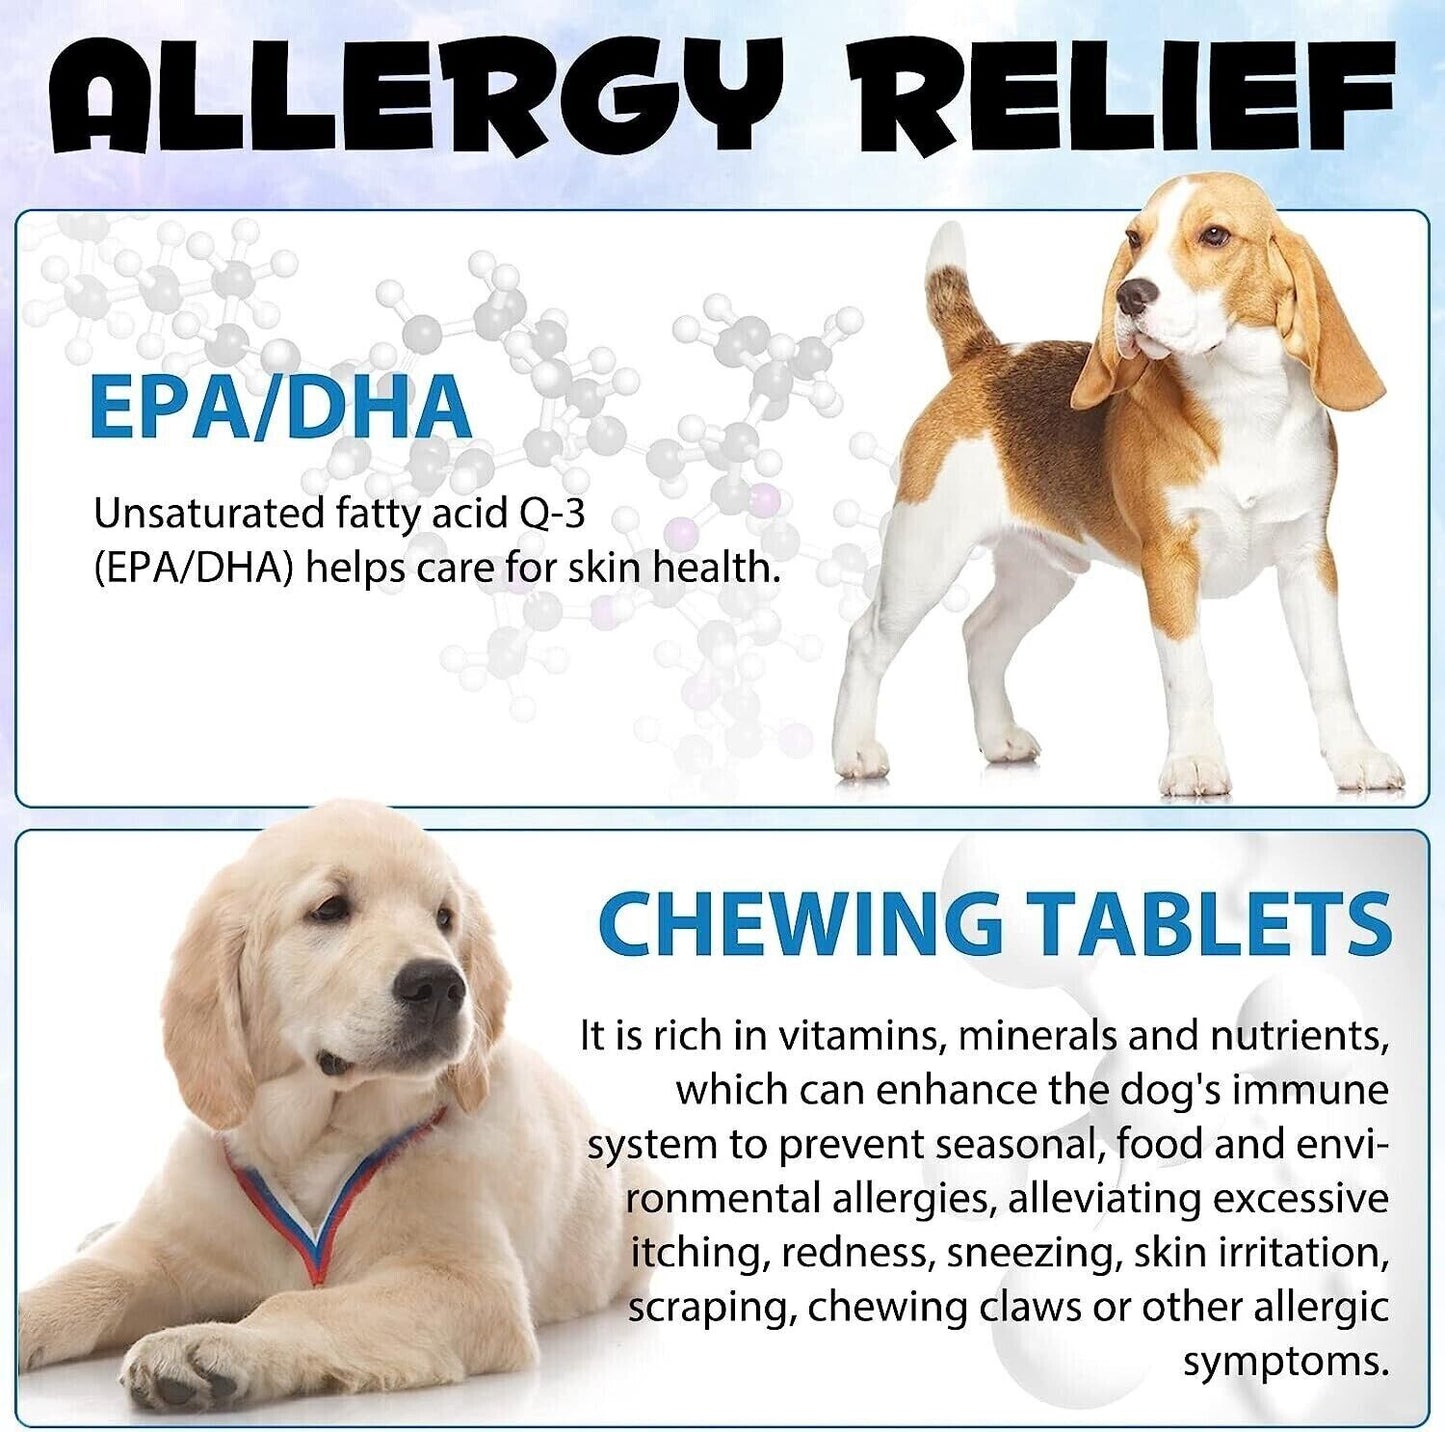 Dog Allergy Itchy Relief - 150 Immune System Support Chews with Duck Flavour.